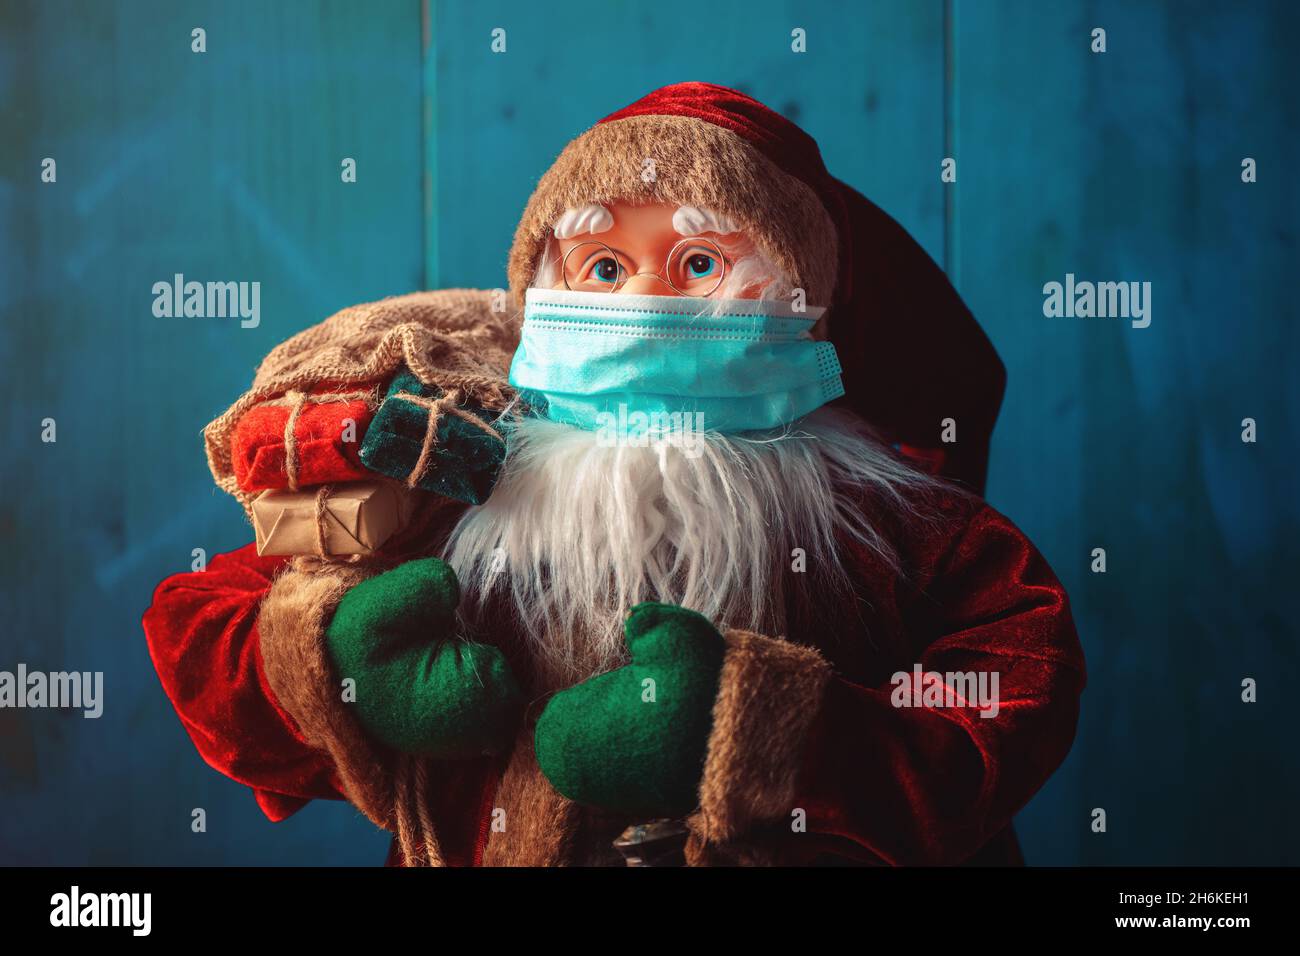 Santa Claus dummy toy with protective face mask for Covid-19 pandemics, selective focus Stock Photo